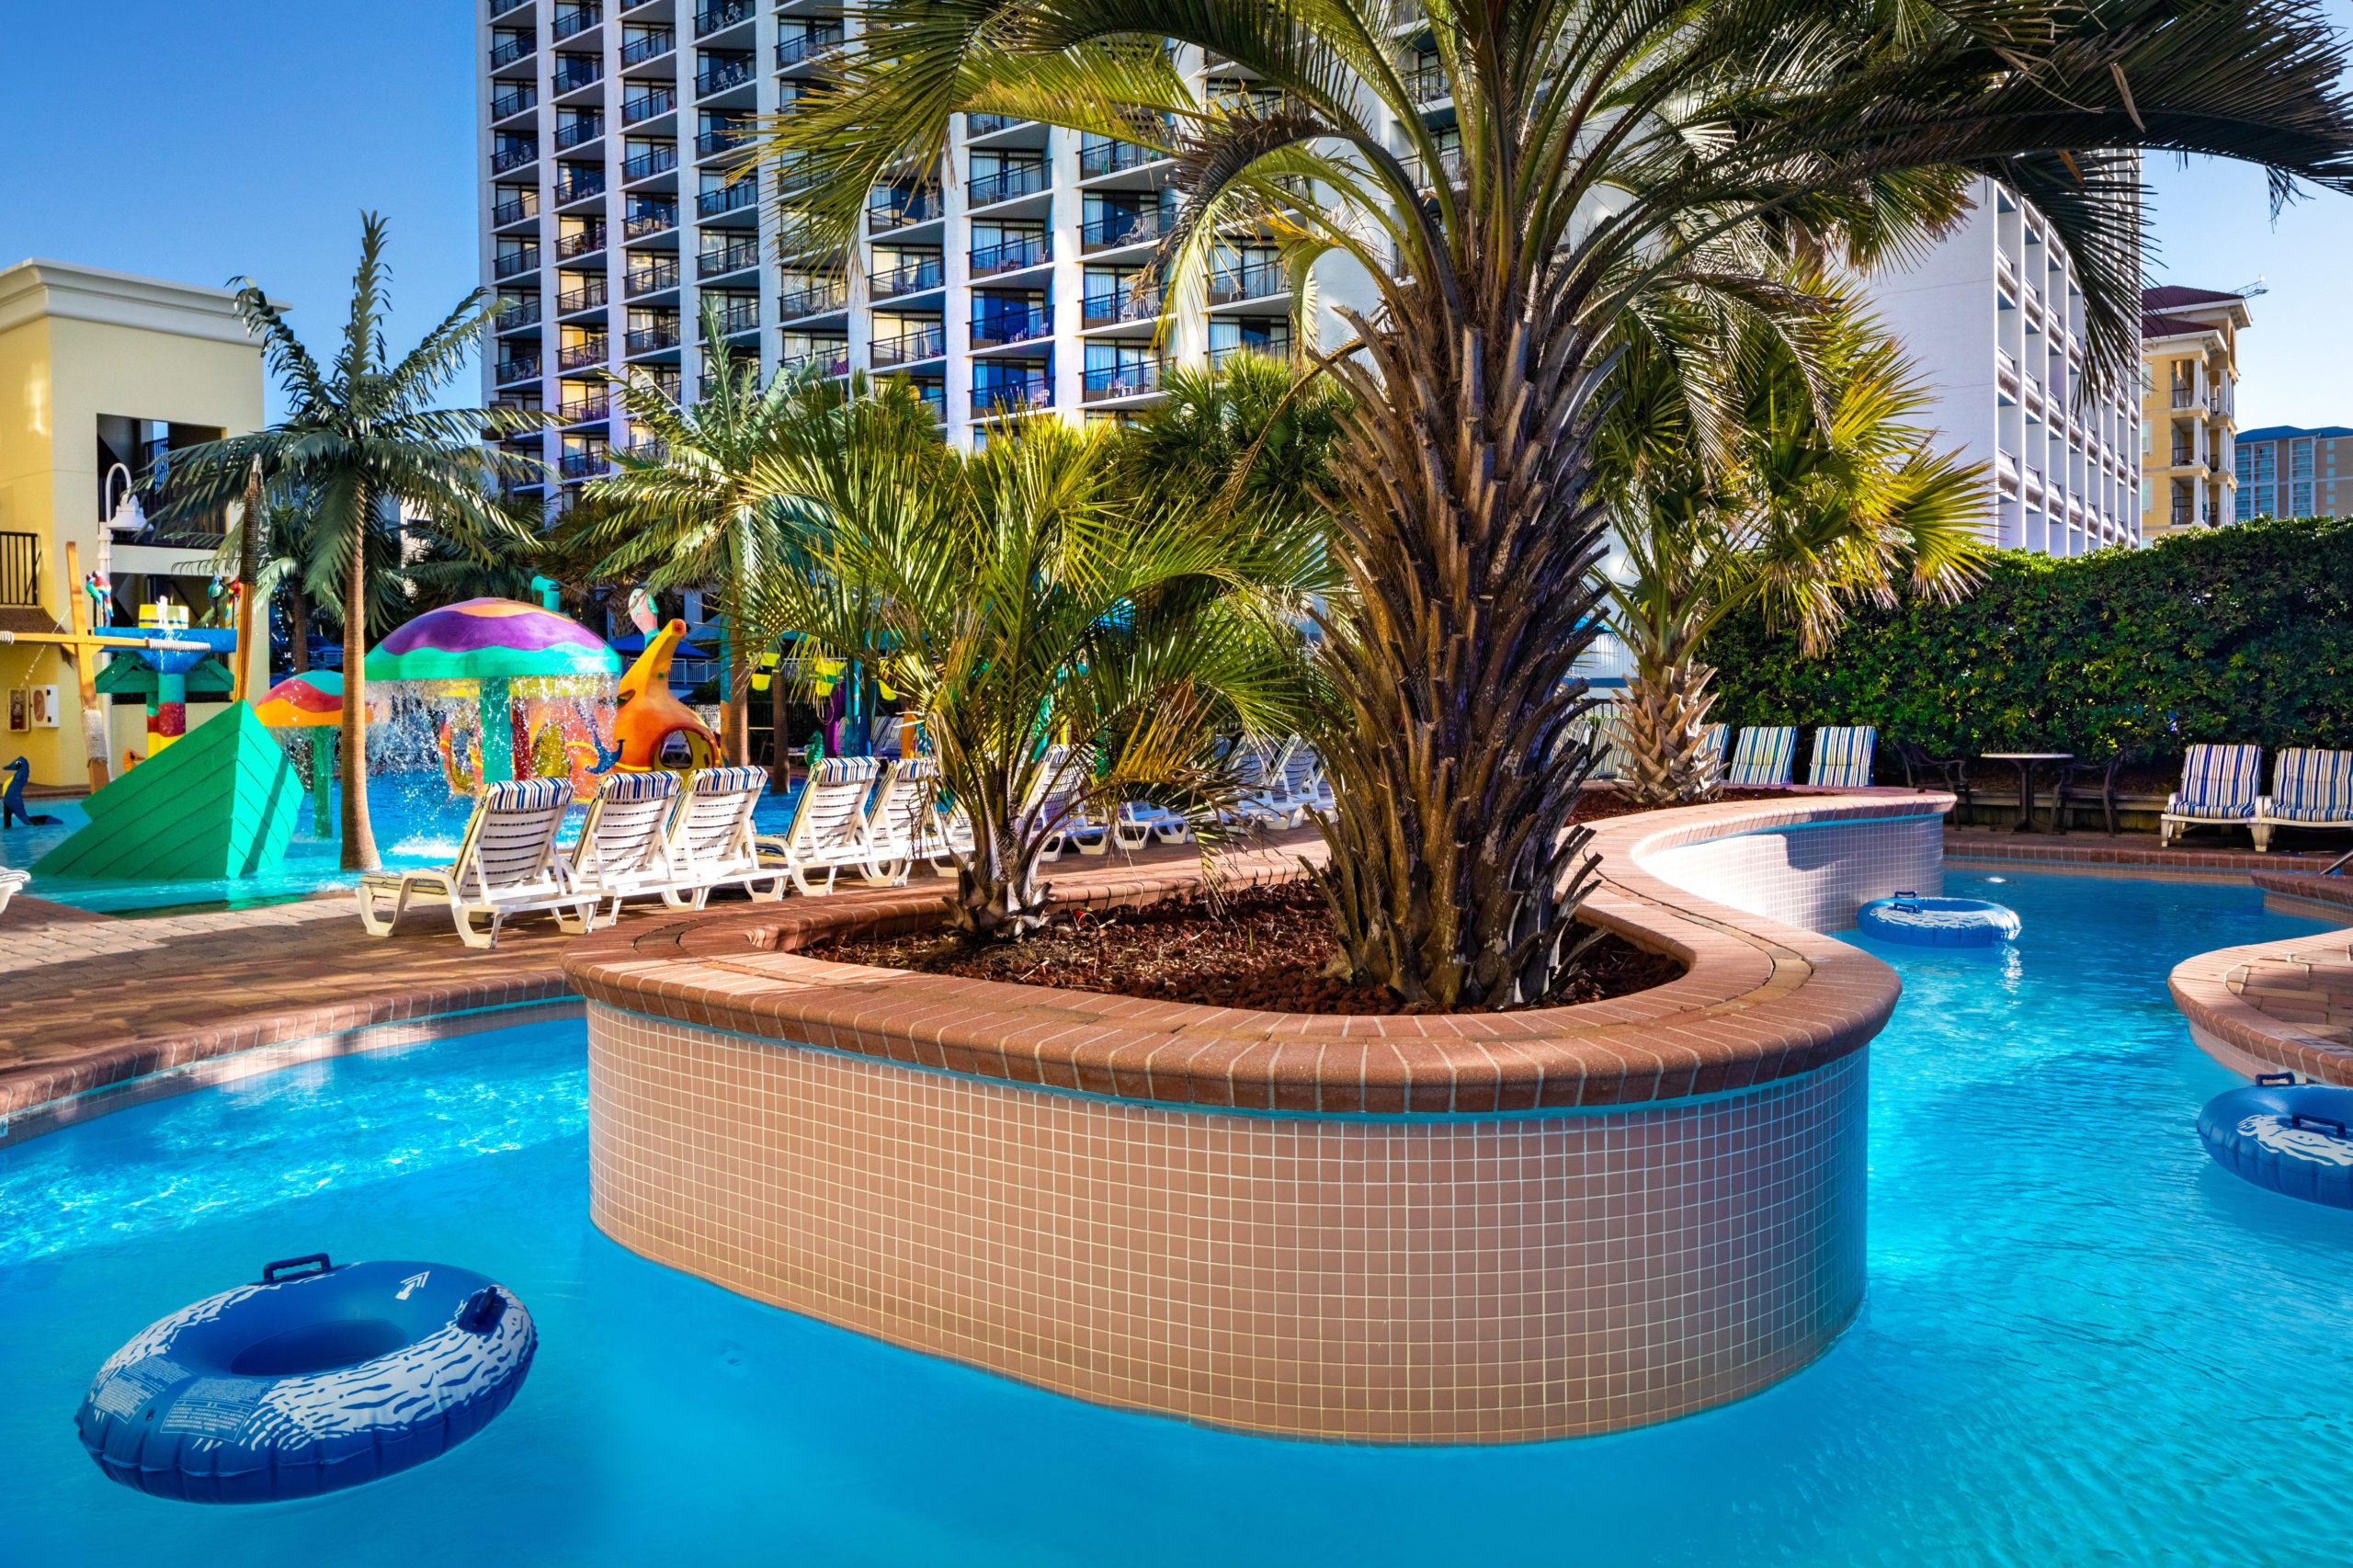 Oceanfront Lazy River and Waterpark at Sea Crest Resort